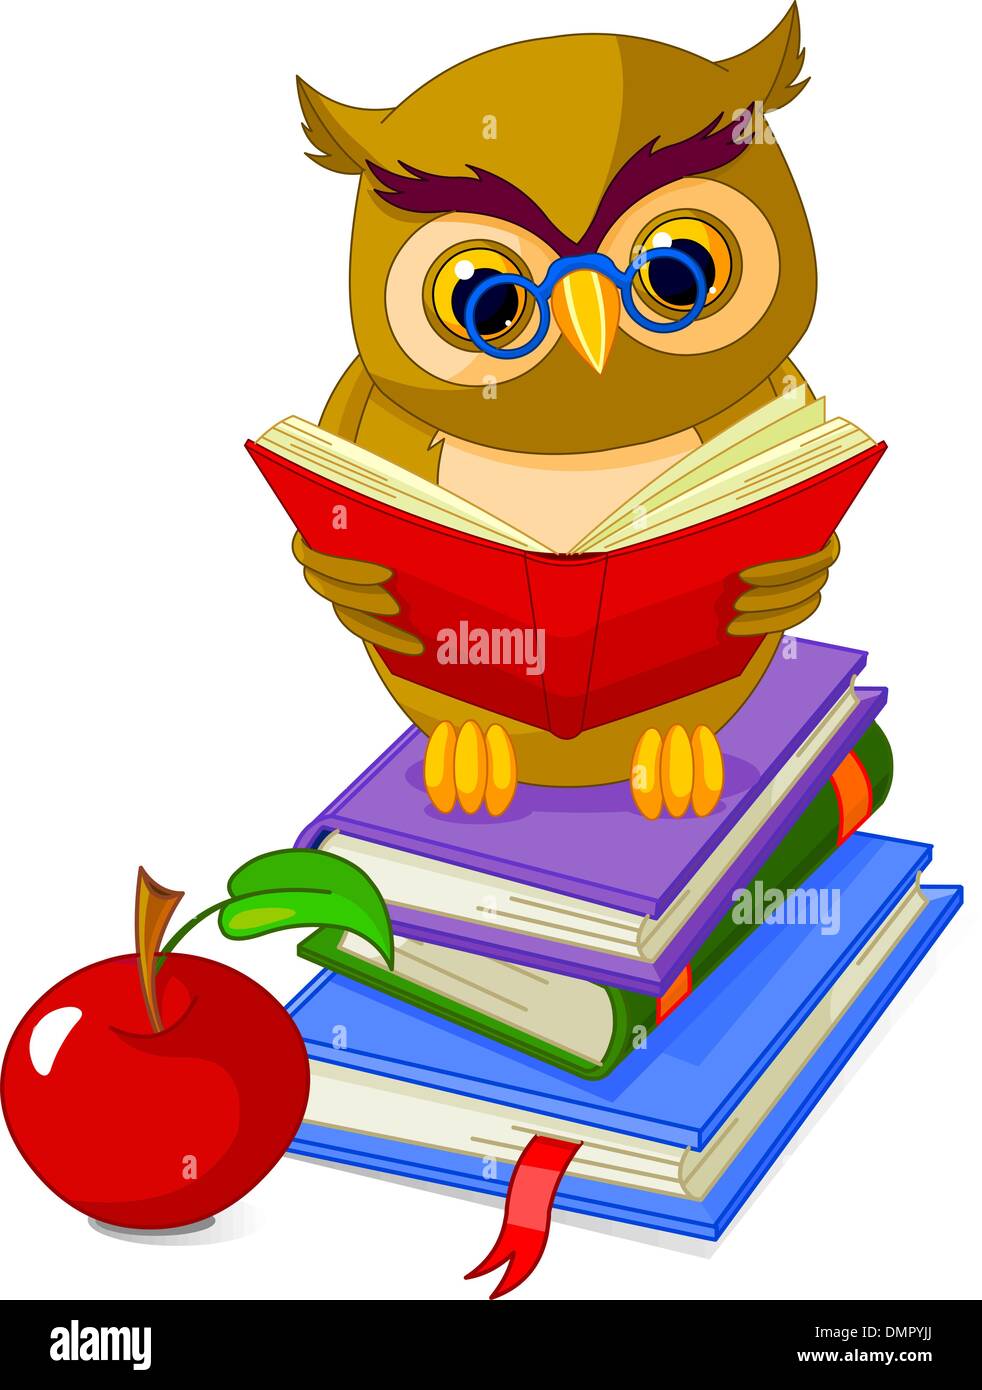 Wise Owl sitting on Pile book Stock Vector